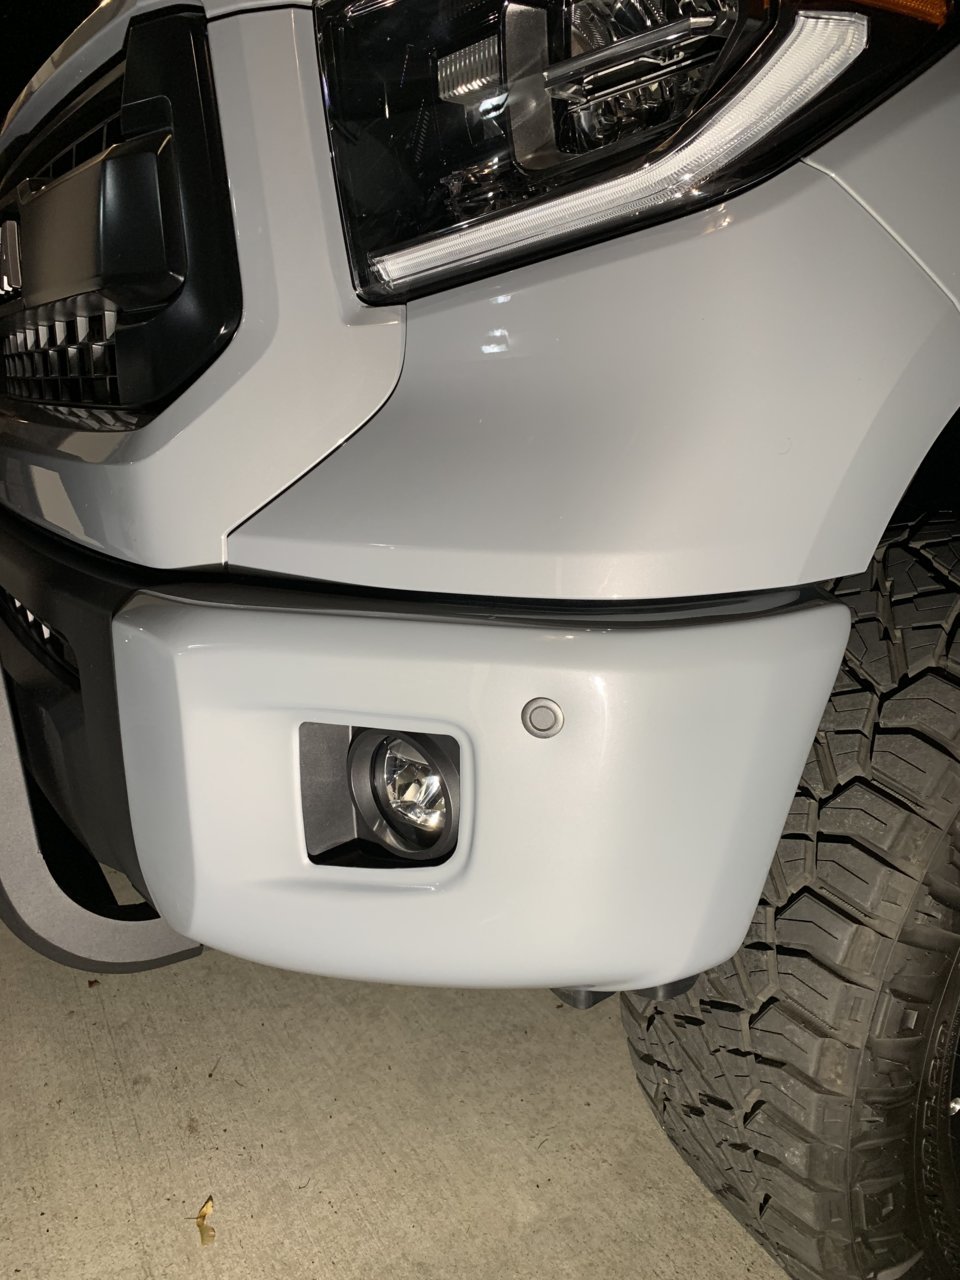 Chrome Delete Covers for Tundra Bumpers - BumperShellz | Page 131